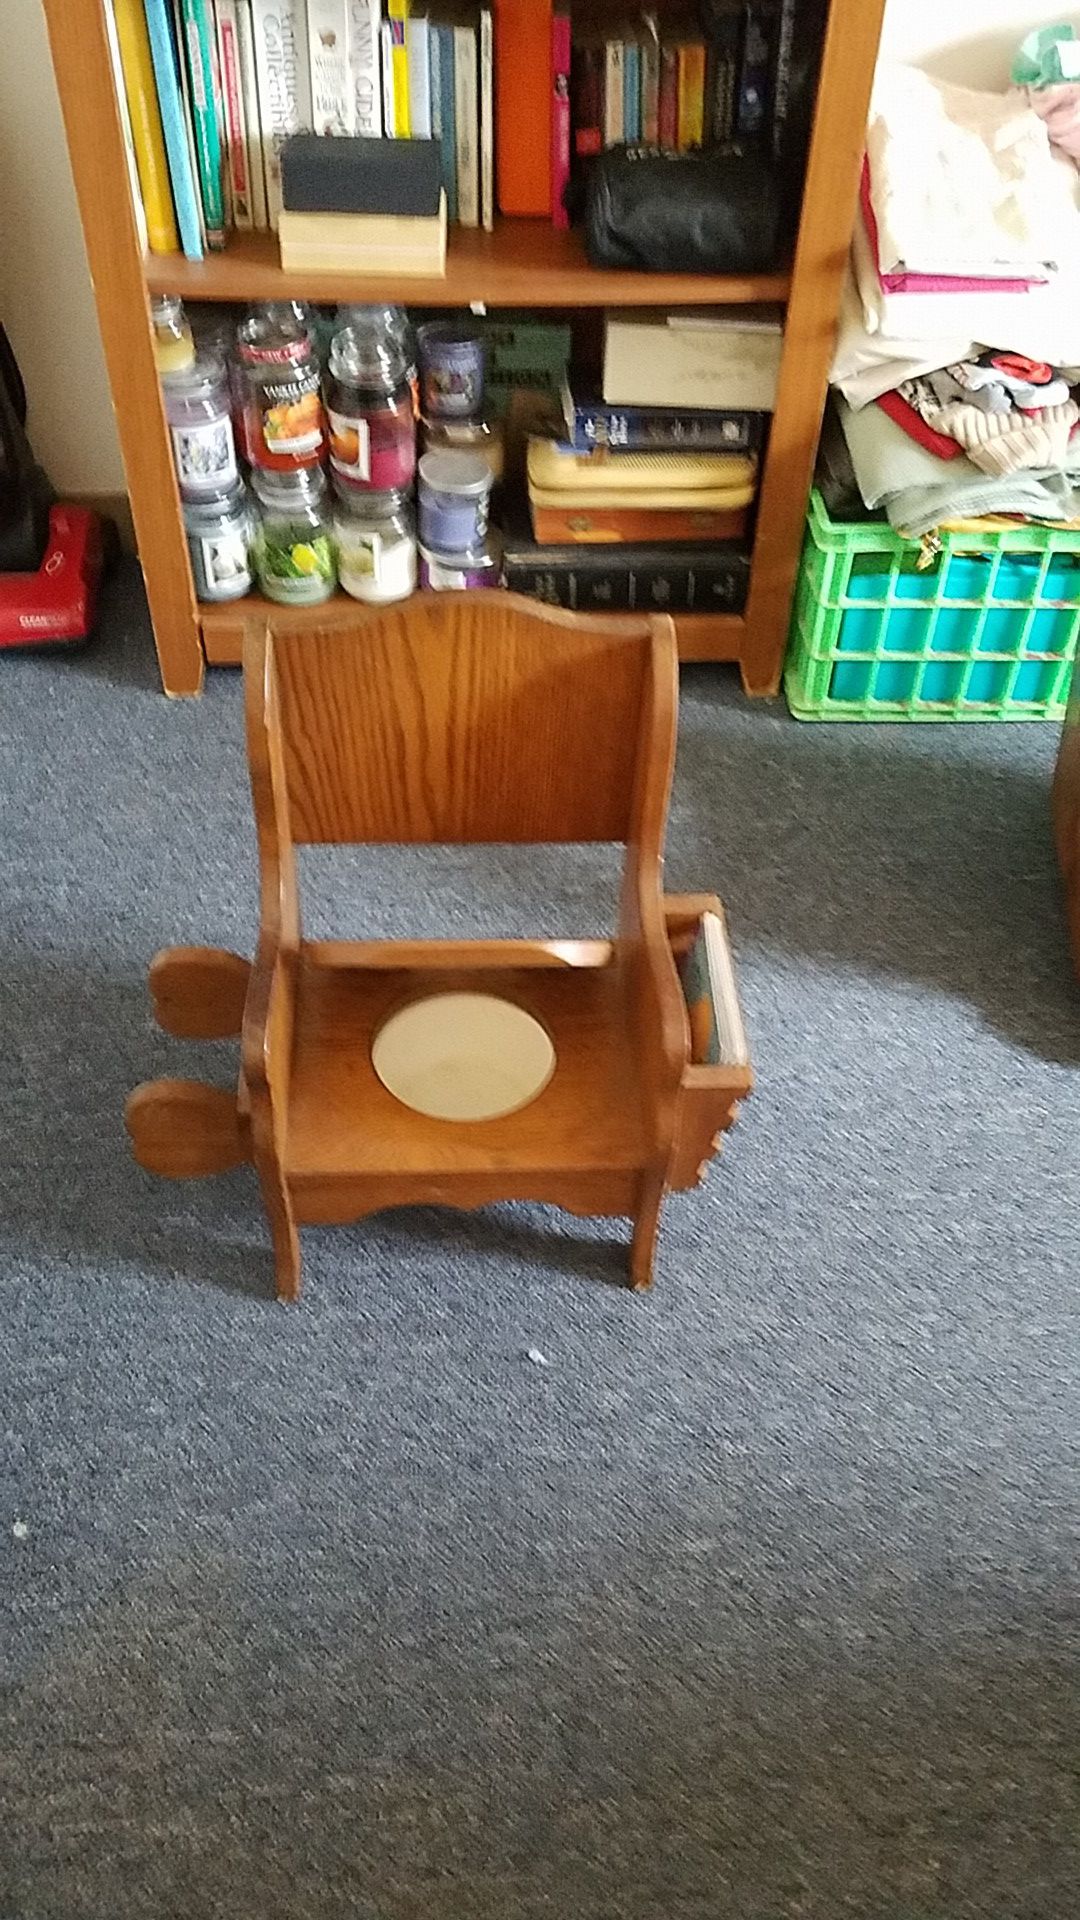 Antique potty chair w/ book holder an toilet roll holder . $50.00